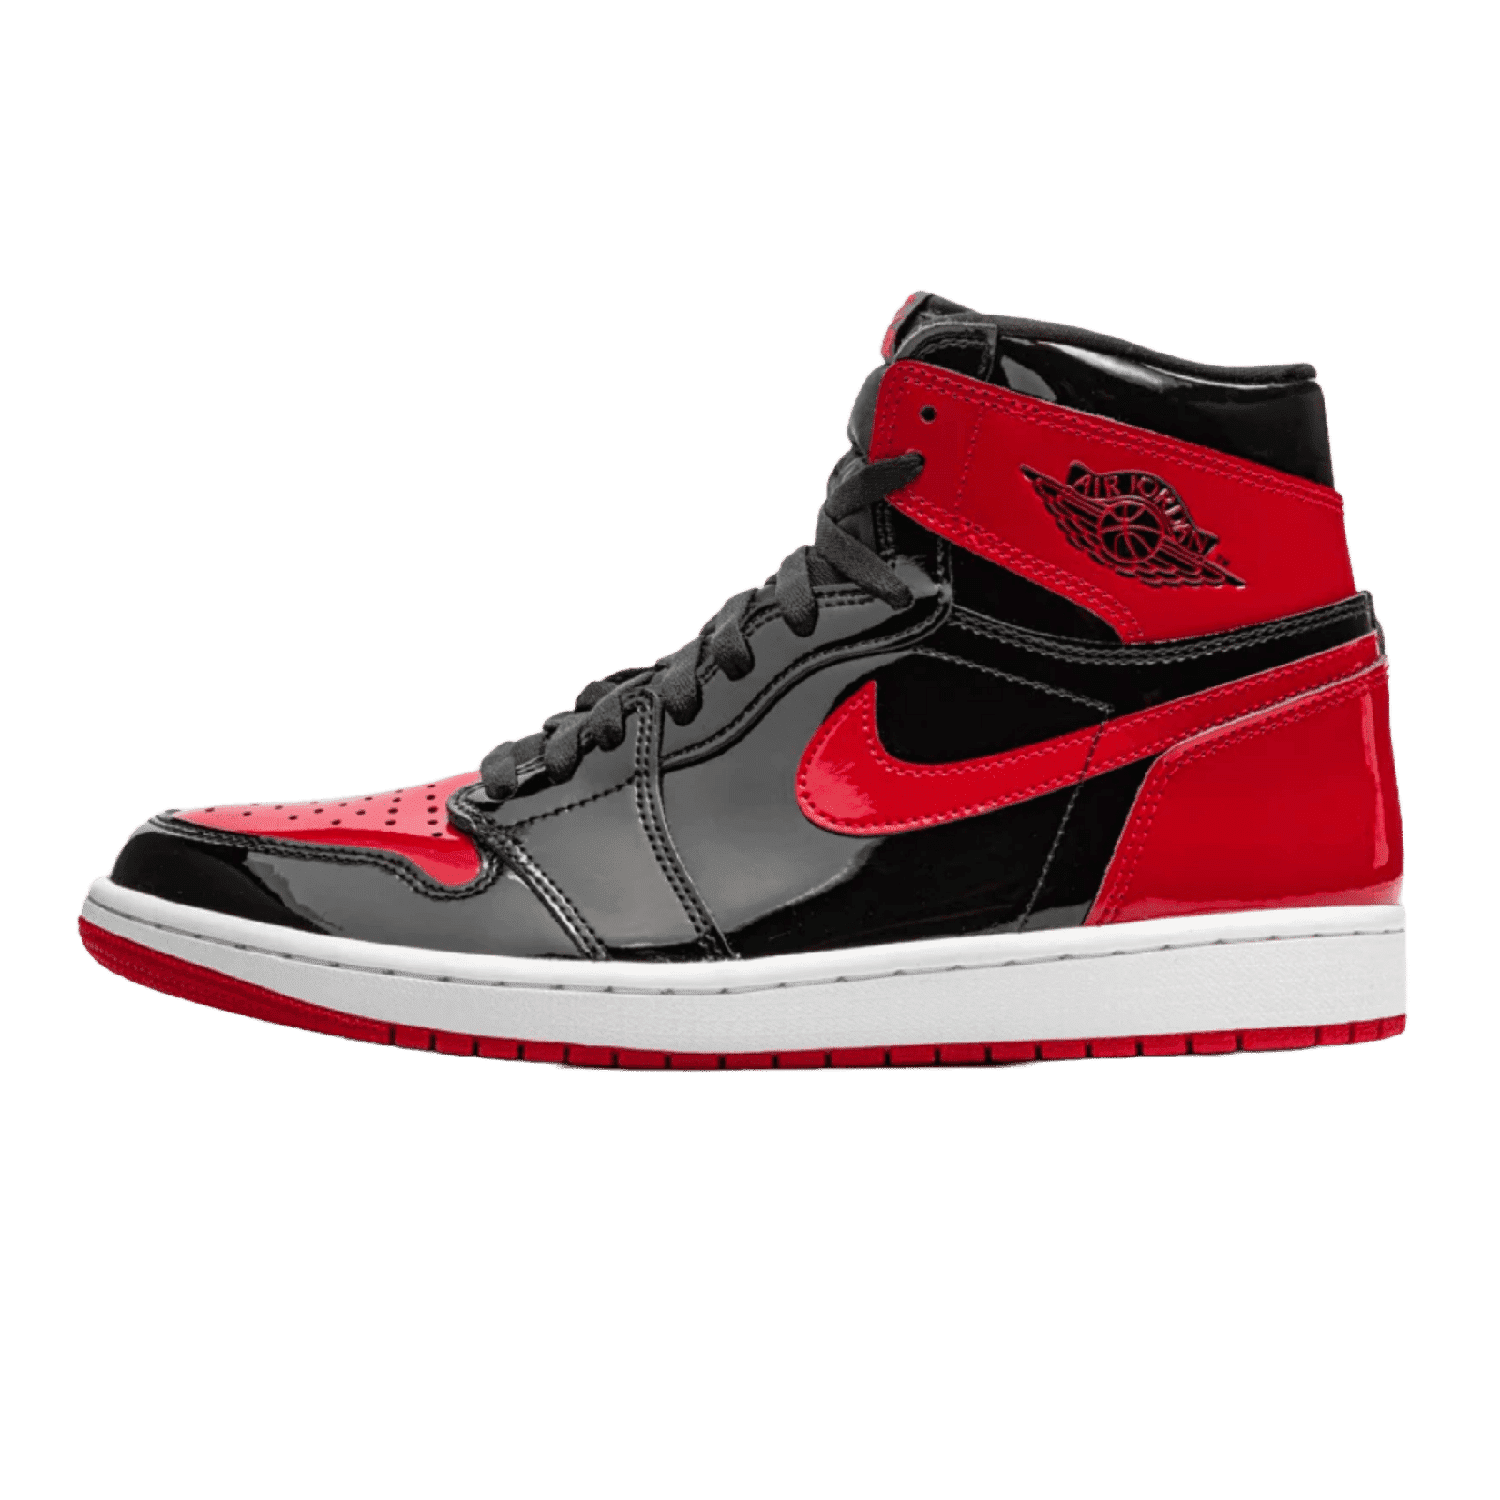 Nike Nike Air Jordan 1 Retro High Legends Of The Summer Chrome Toe  Size  10.5 Limited Edition Available For Immediate Sale At Sotheby's